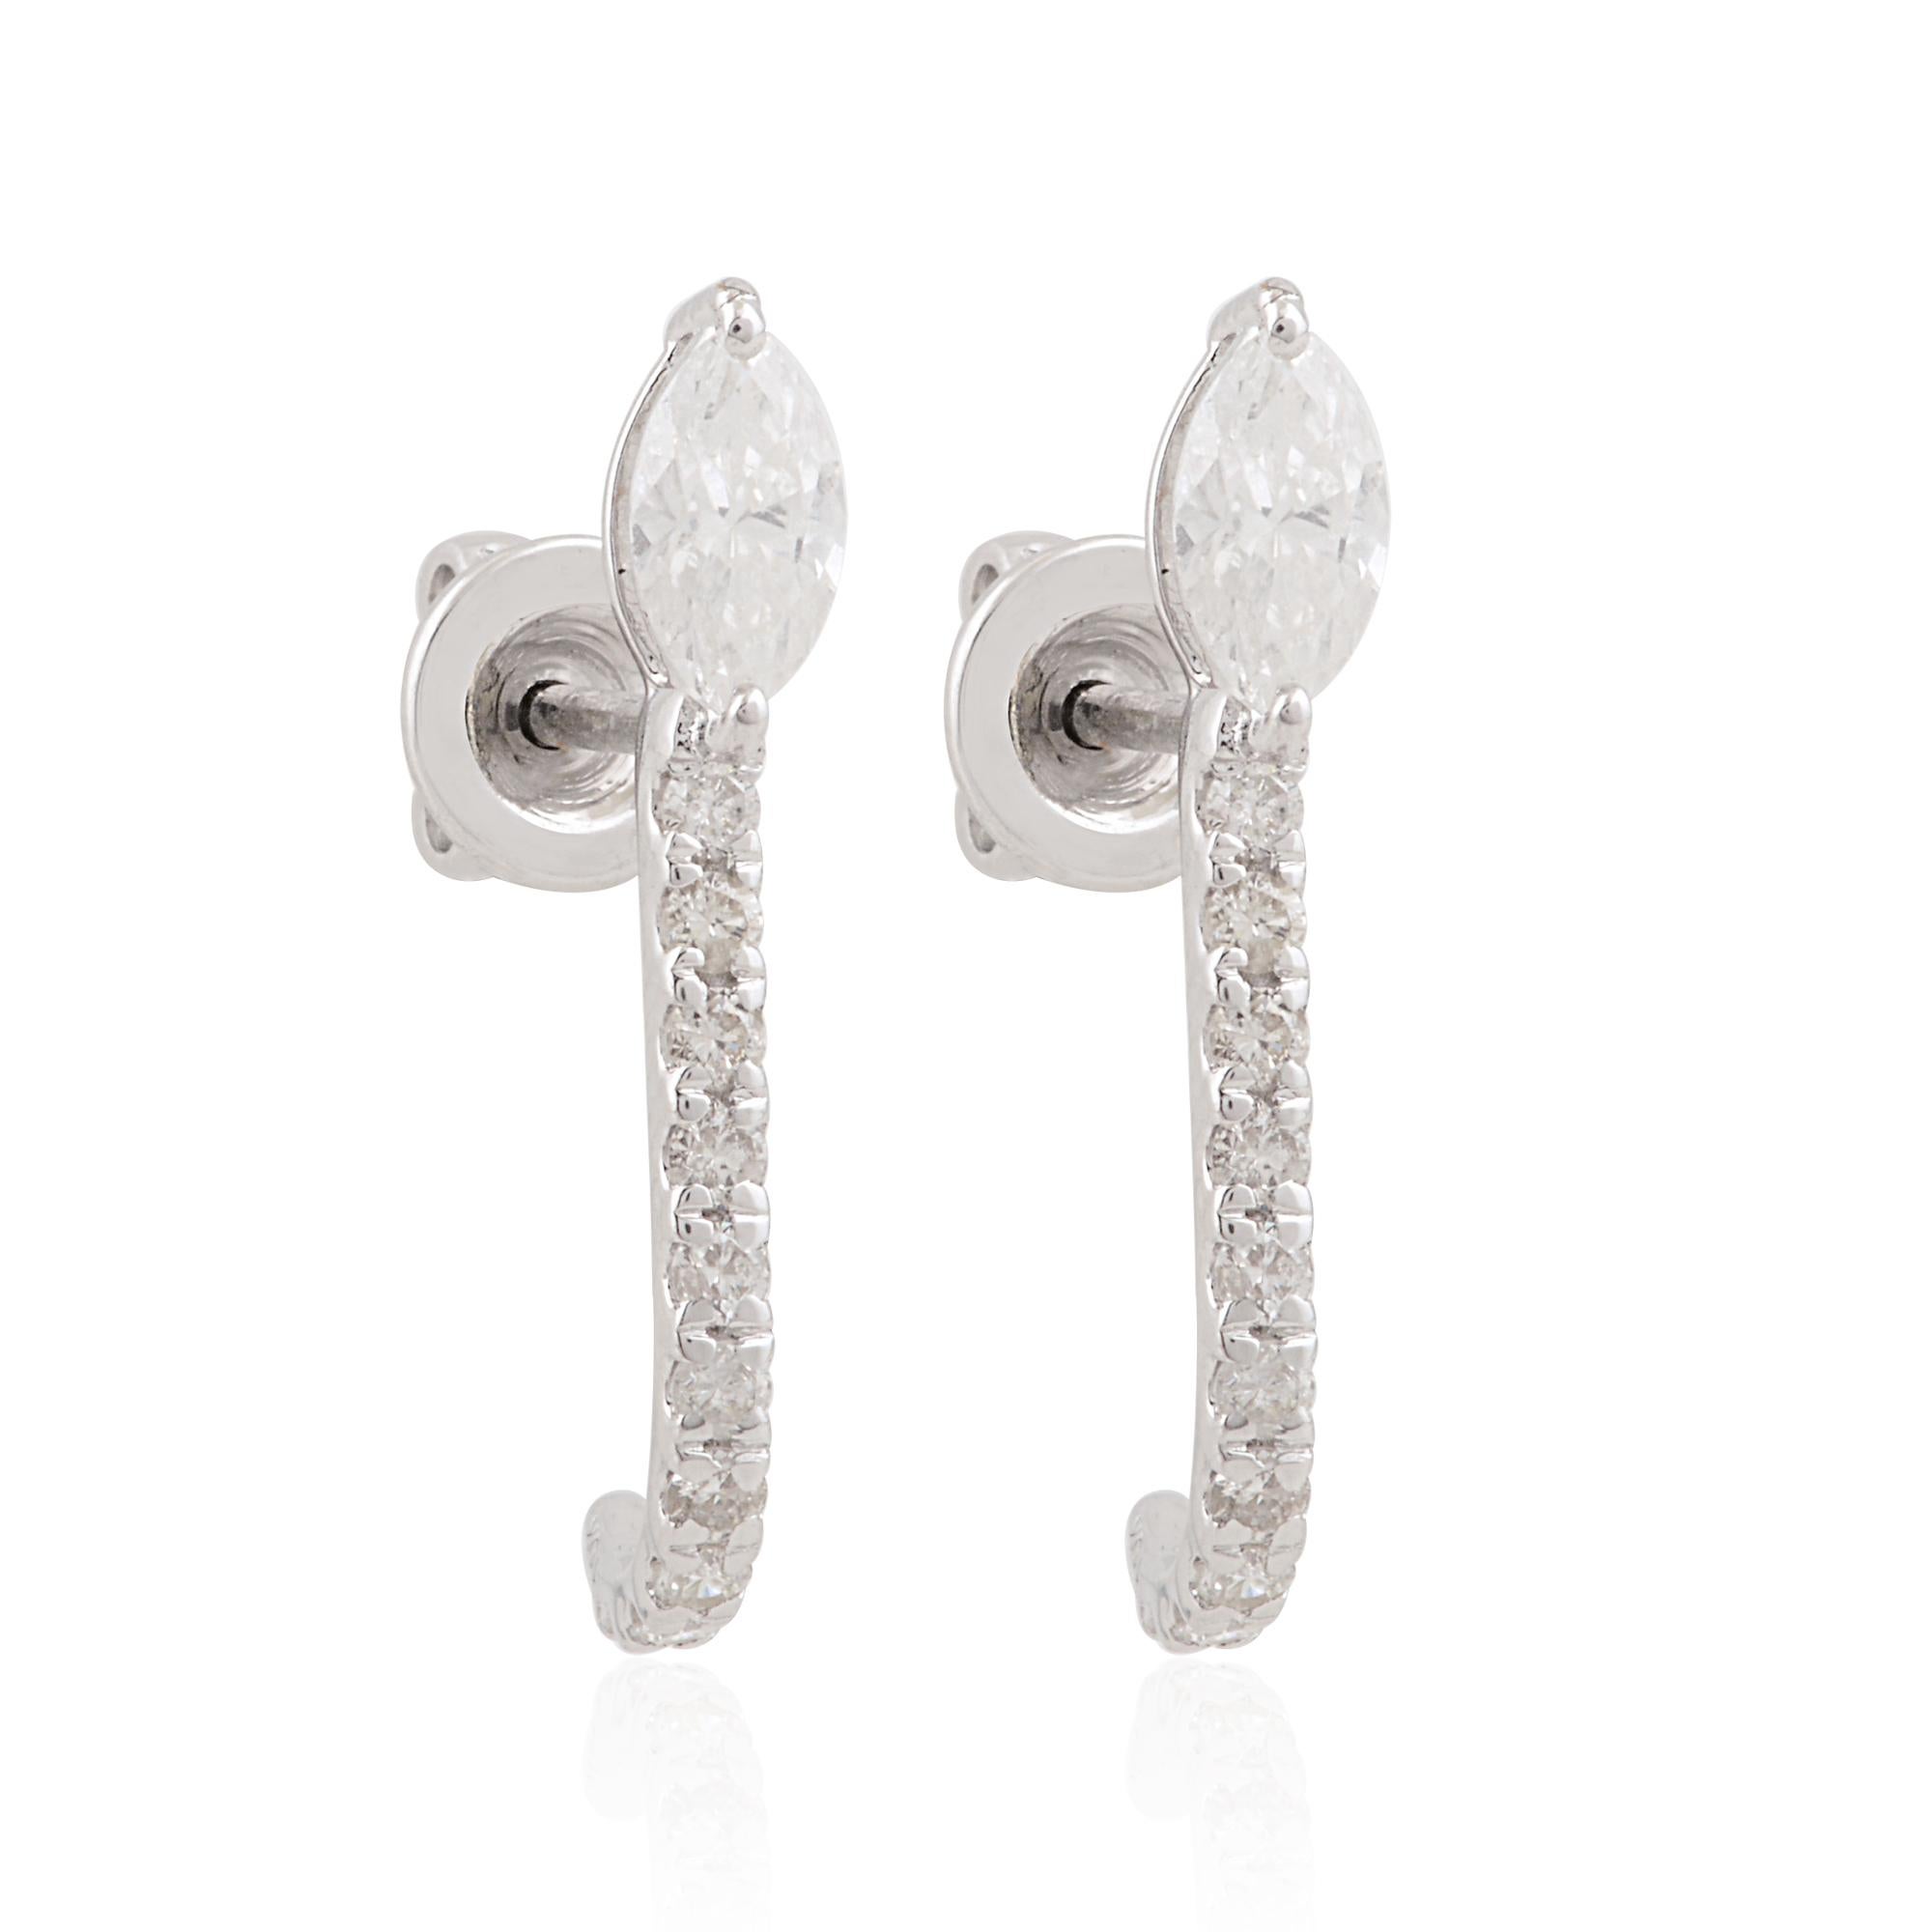 Indulge in the timeless elegance of these exquisite half hoop earrings, adorned with dazzling marquise-cut diamonds set in lustrous 10 karat white gold. Each earring features a total of 0.64 carats of shimmering diamonds, carefully selected for